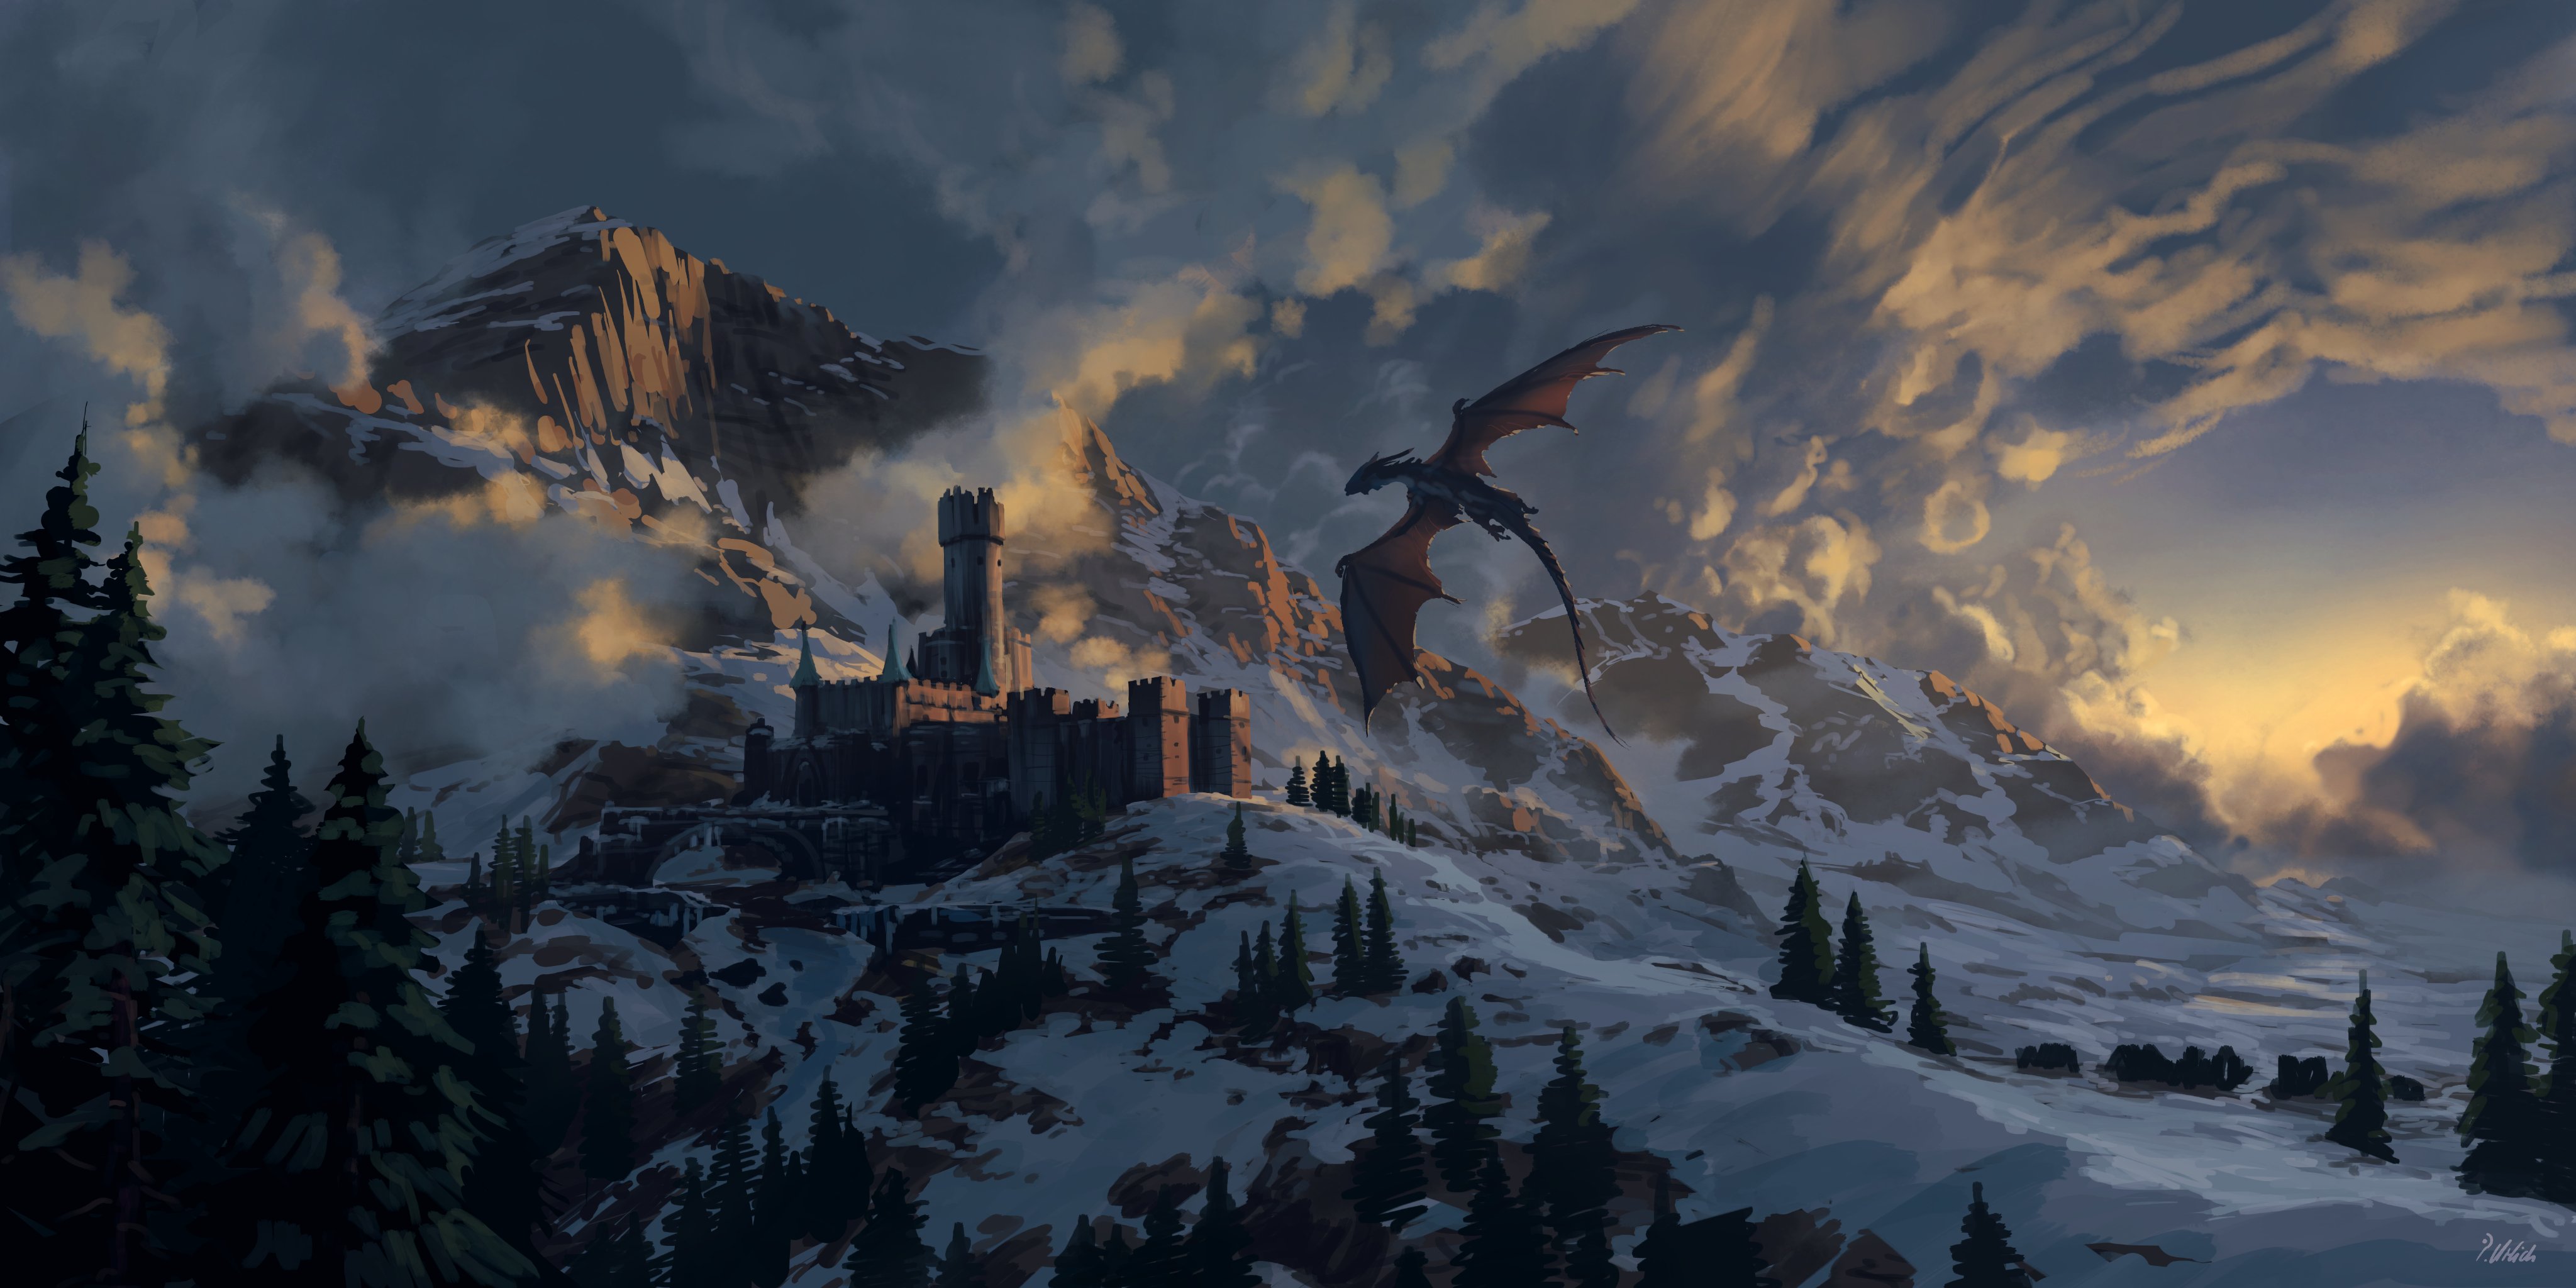 General 4096x2048 artwork digital art dragon medieval medieval art clouds mountains castle pine trees snow sky nature trees creature flying